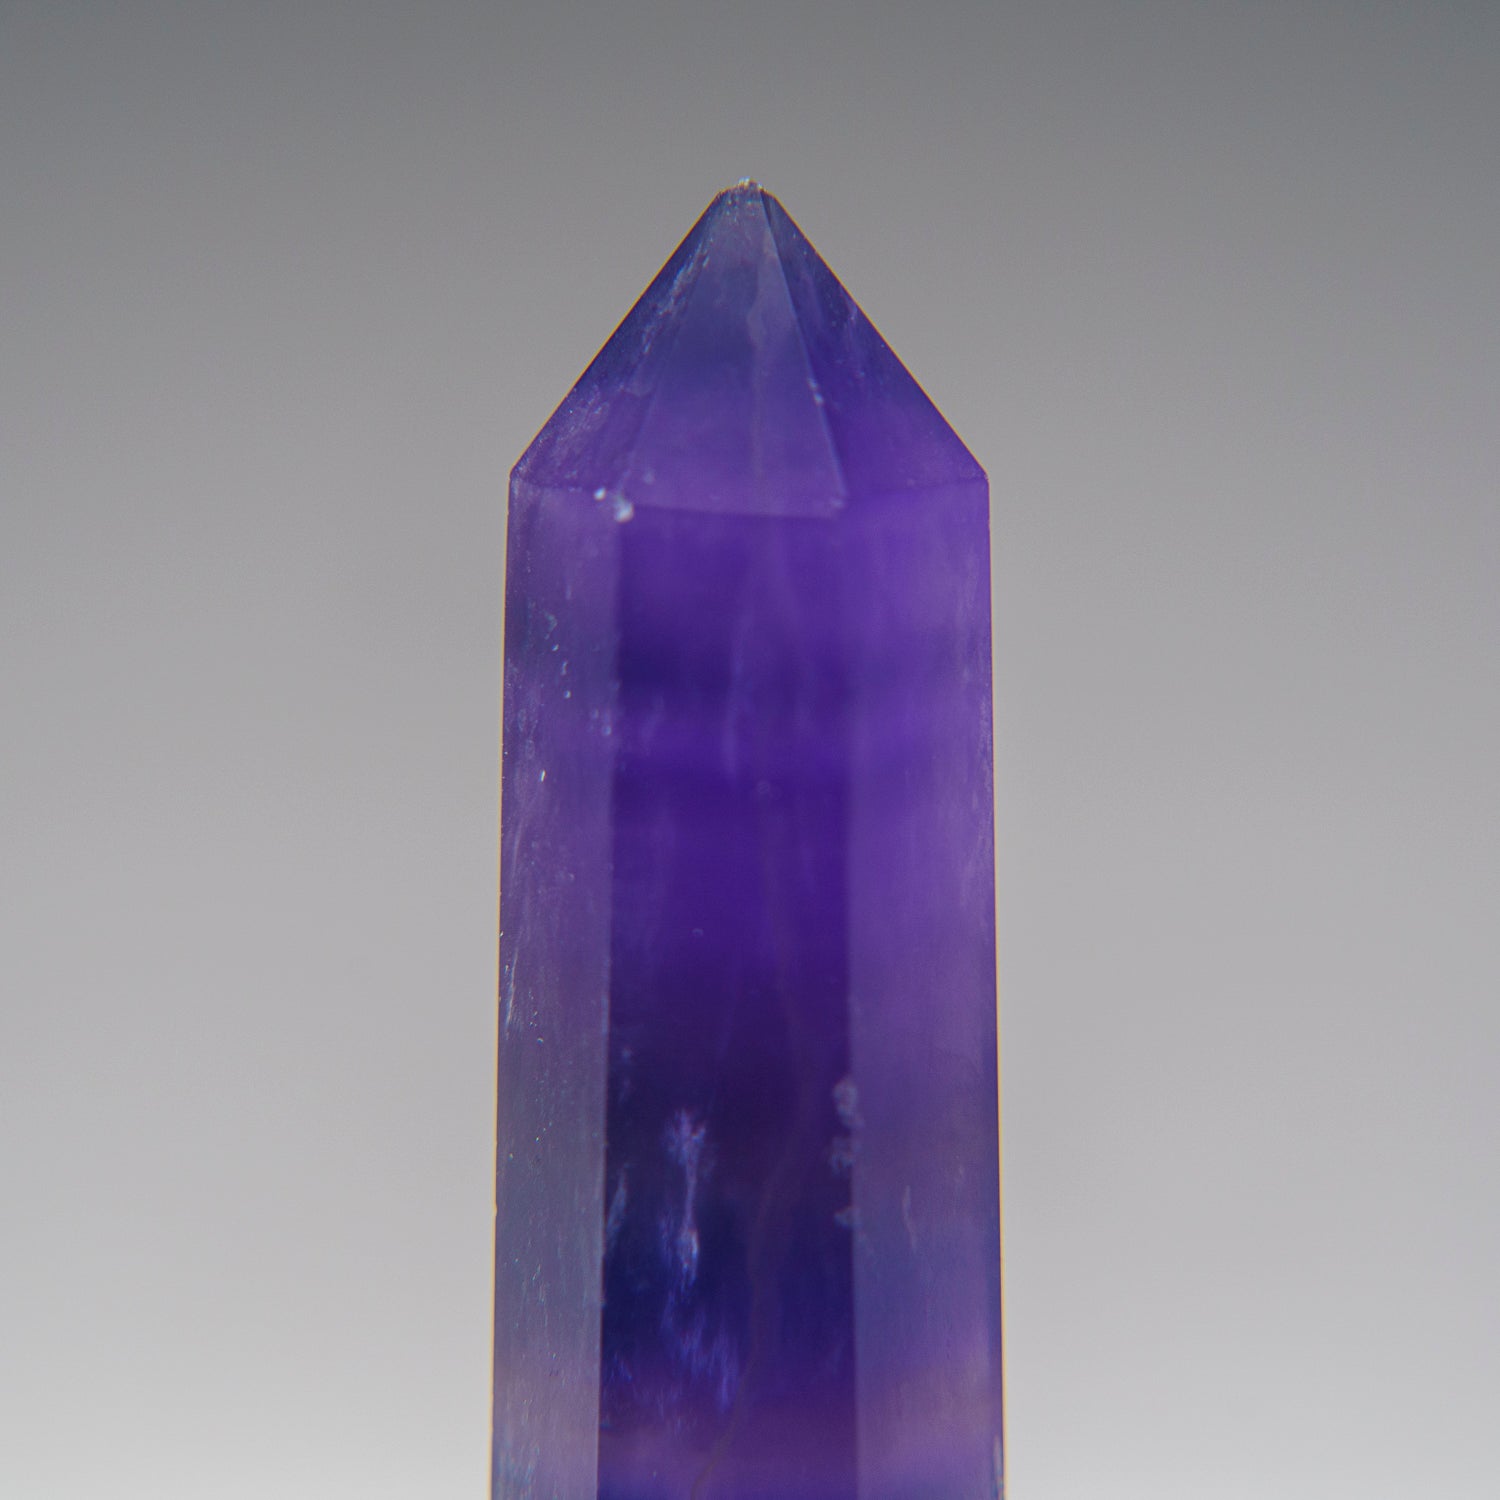 Genuine Polished Purple Fluorite Point from China (90 grams)